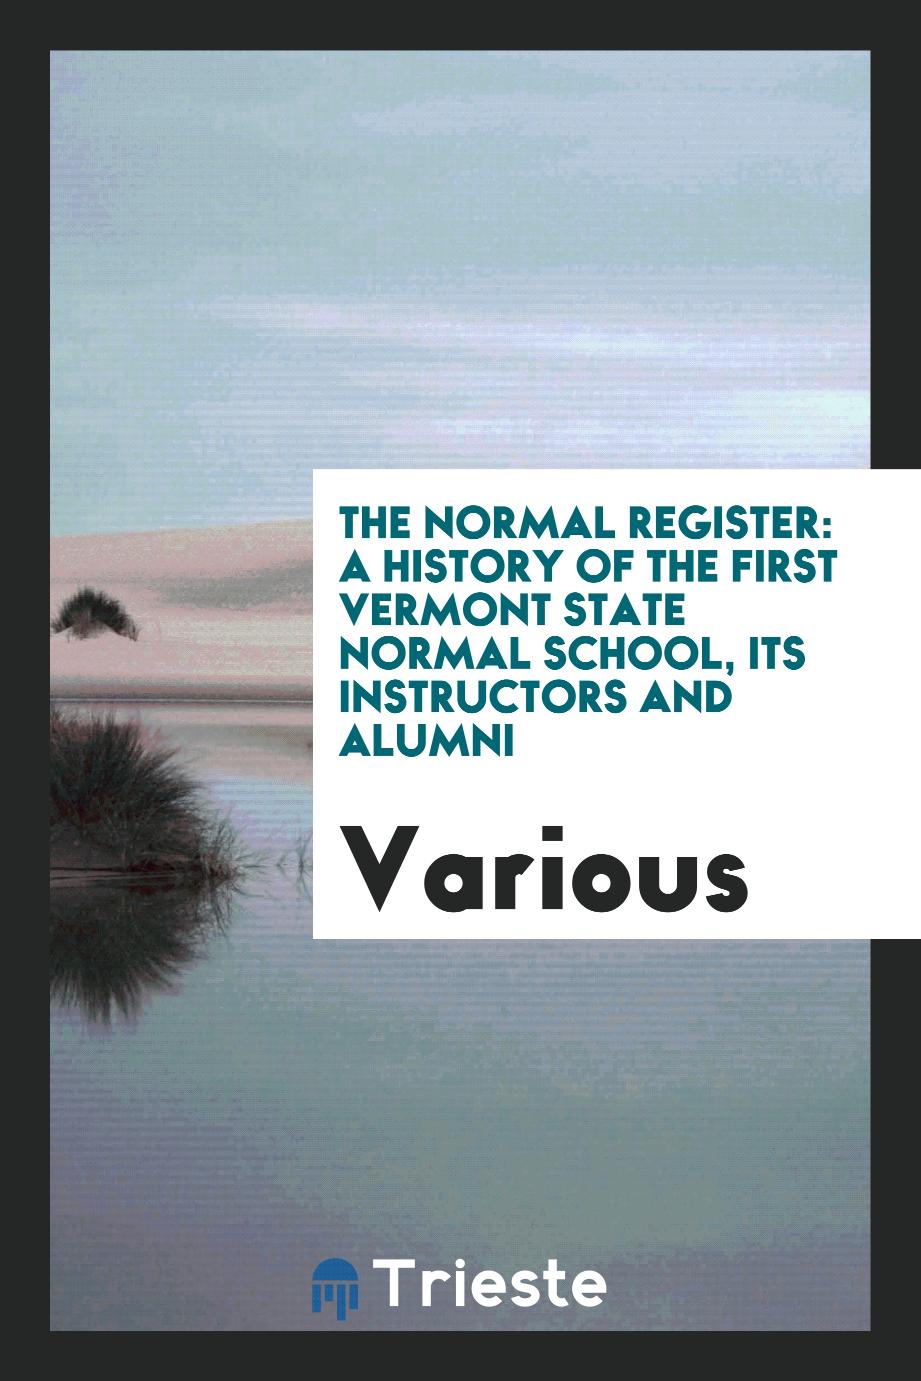 The Normal Register: A History of the First Vermont State Normal School, Its Instructors and Alumni